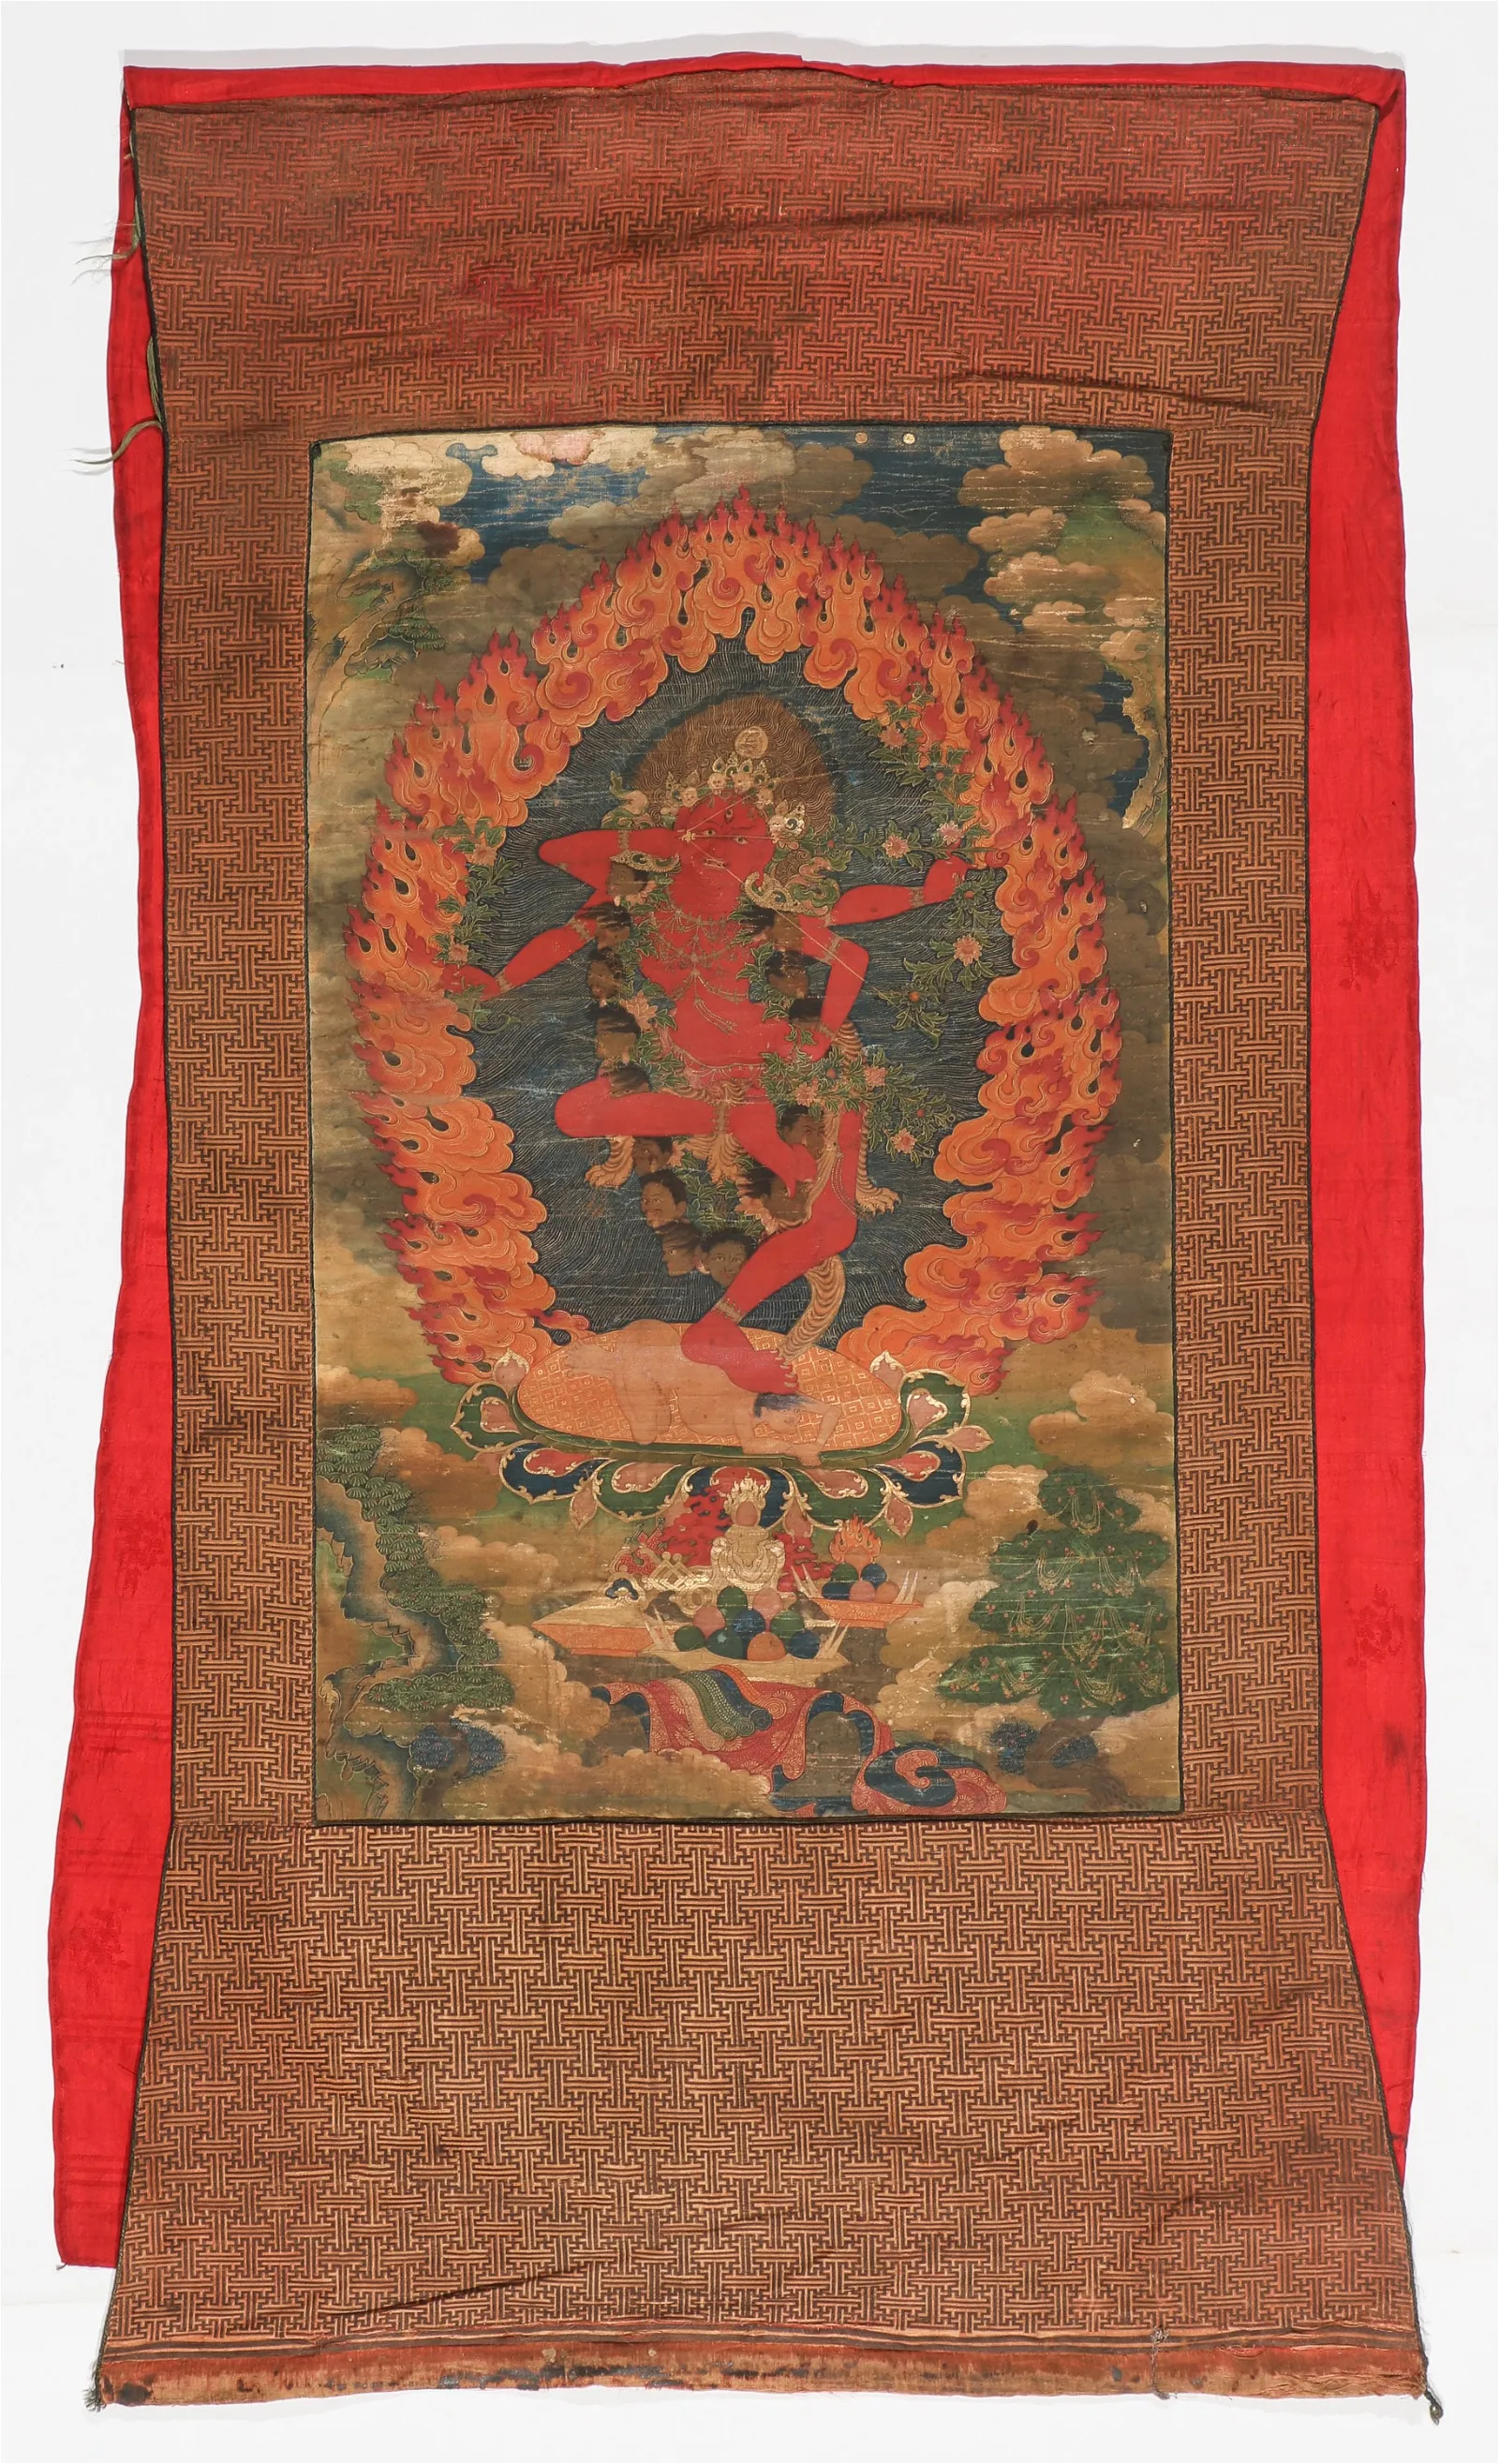 Ethnographic art and textiles soared high above their estimates at Material Culture